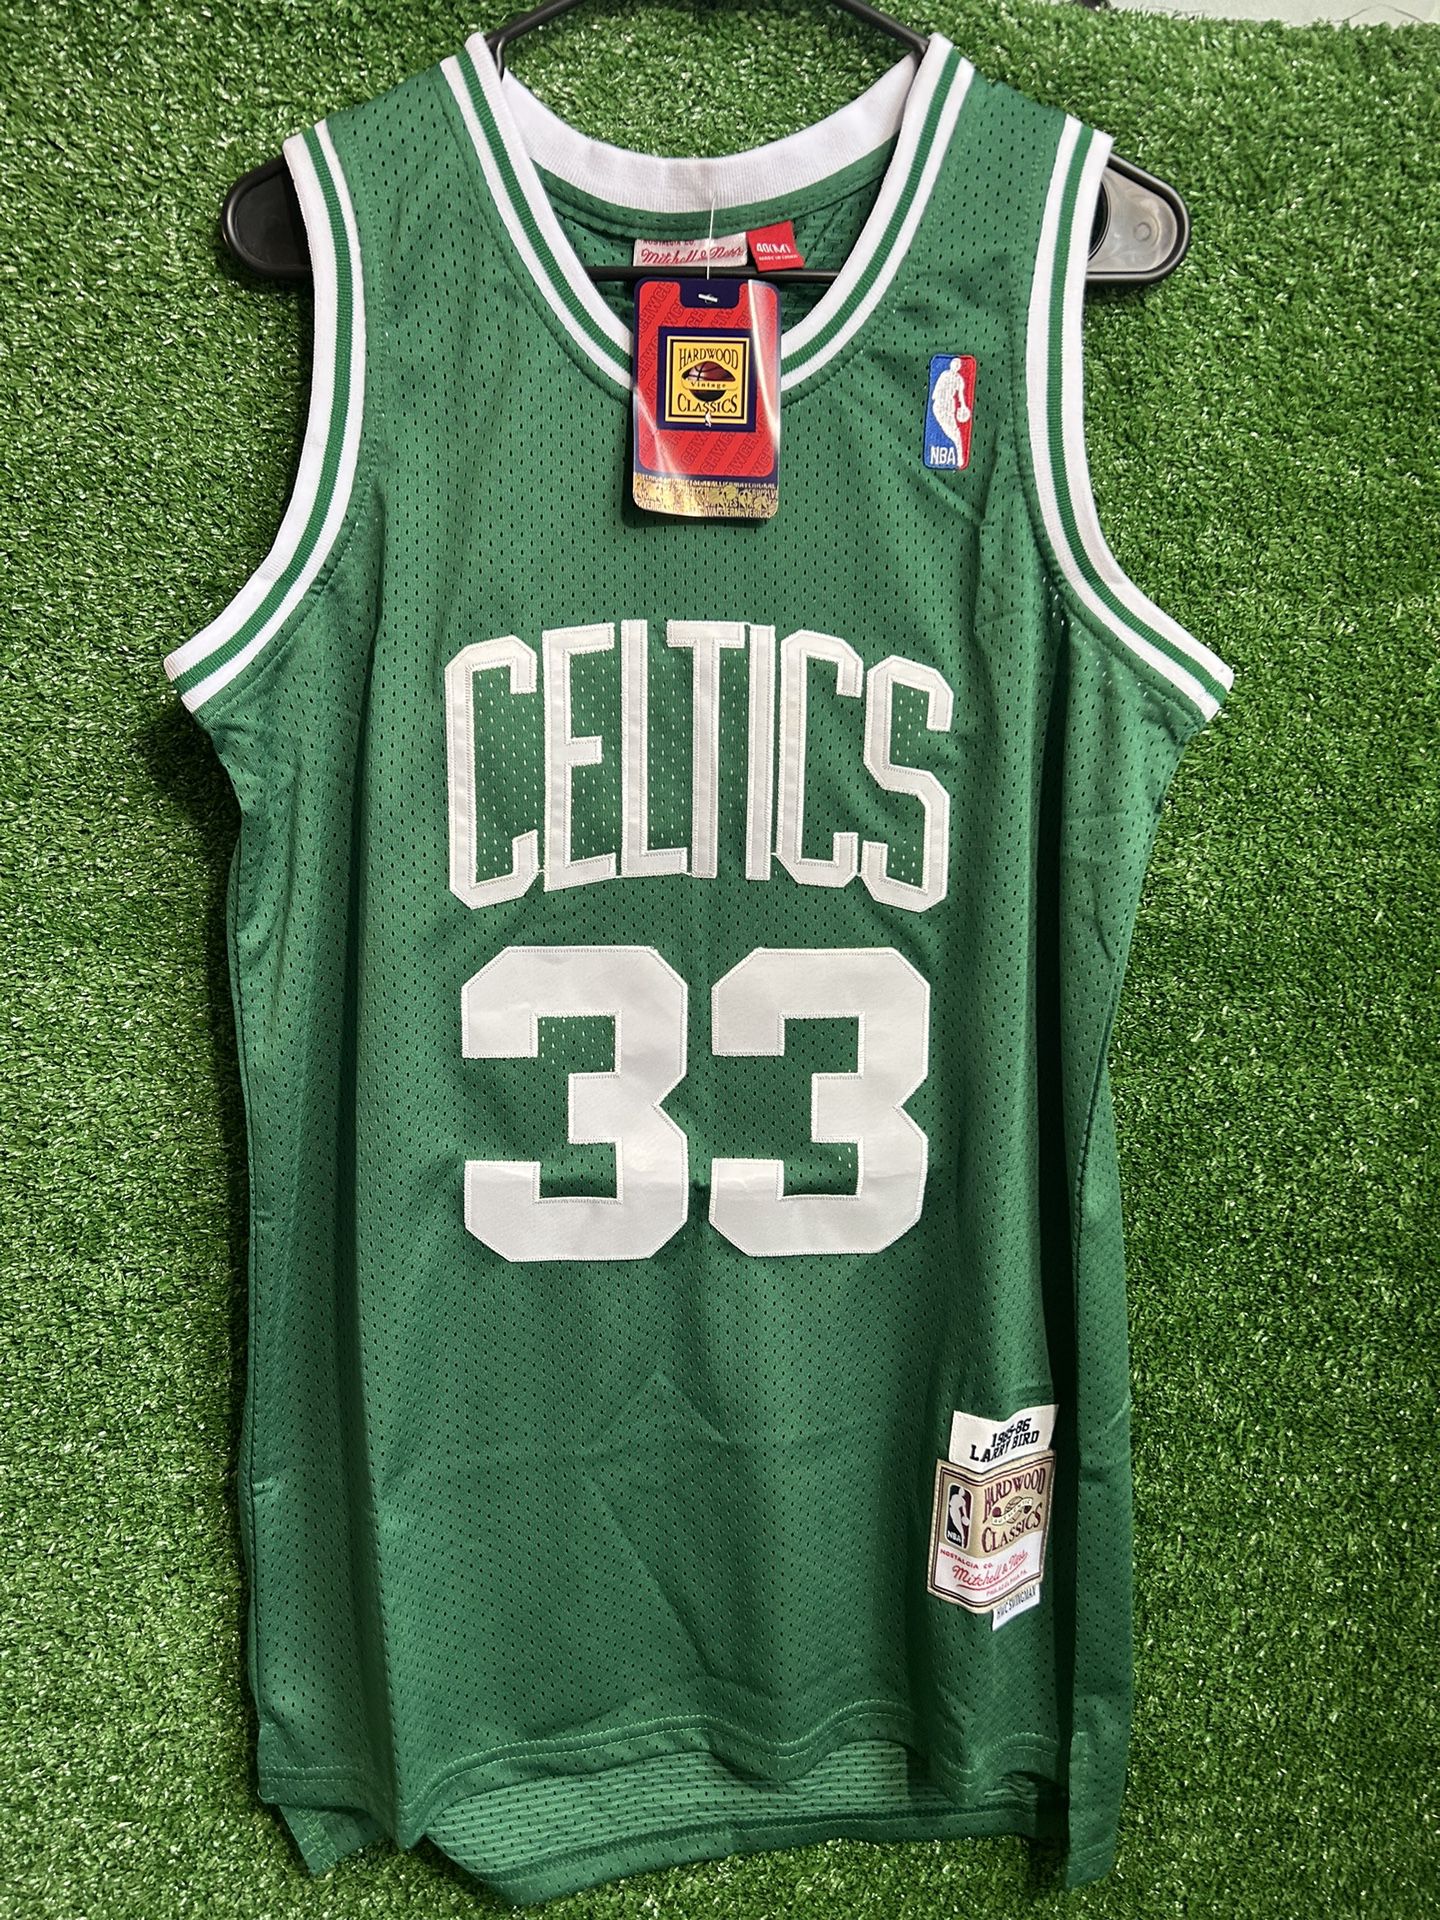 LARRY BIRD BOSTON CELTICS MITCHELL & NESS JERSEY BRAND NEW WITH TAGS SIZE MEDIUM, LARGE AND XL AVAILABLE 